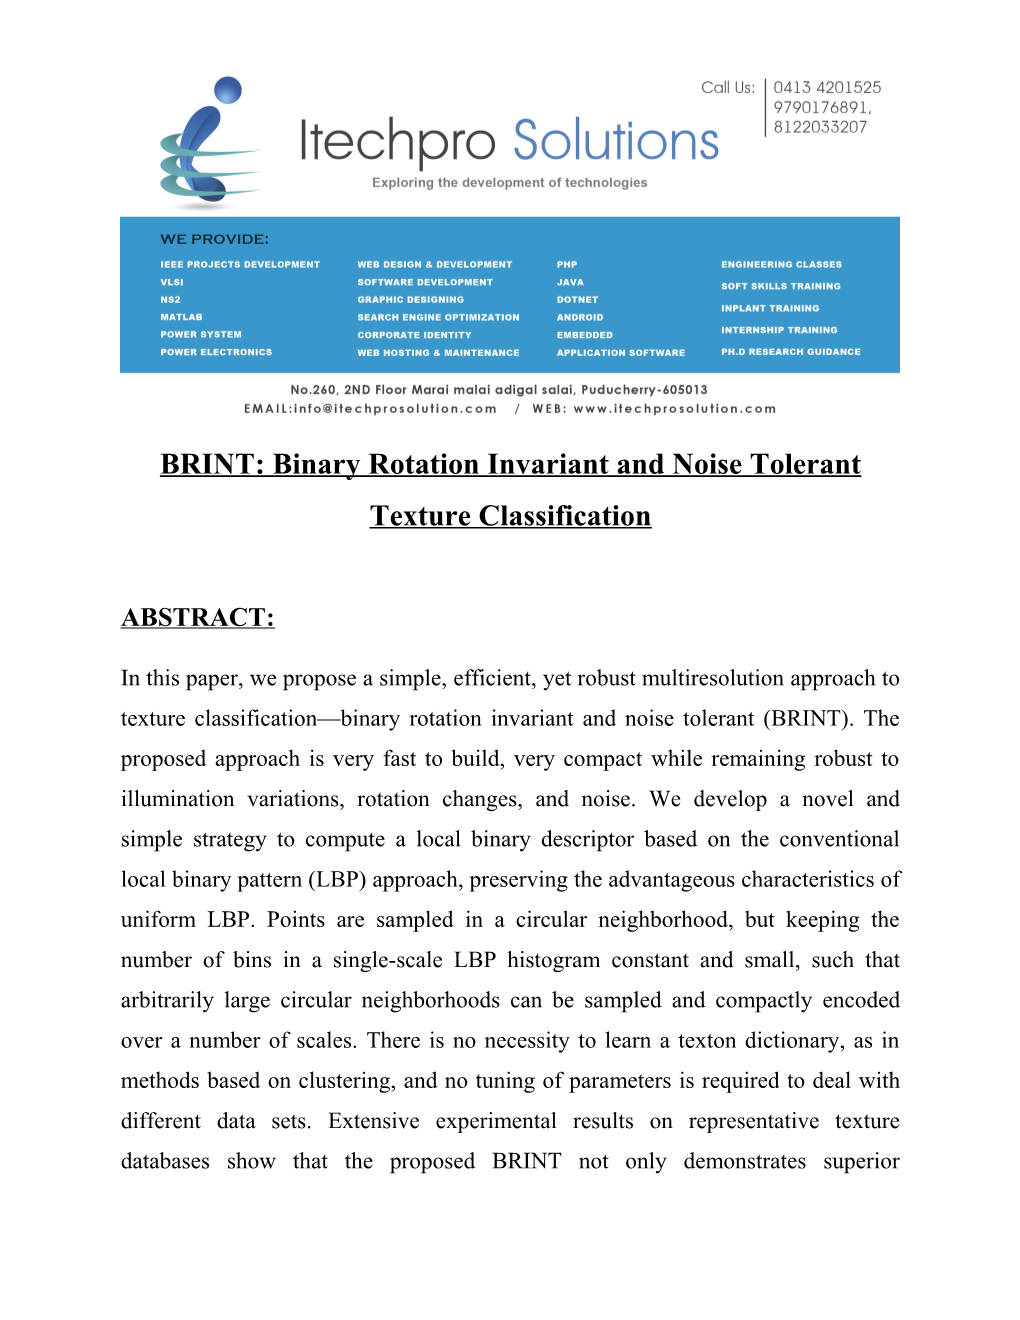 BRINT Binary Rotation Invariant and Noise Tolerant Texture Classification